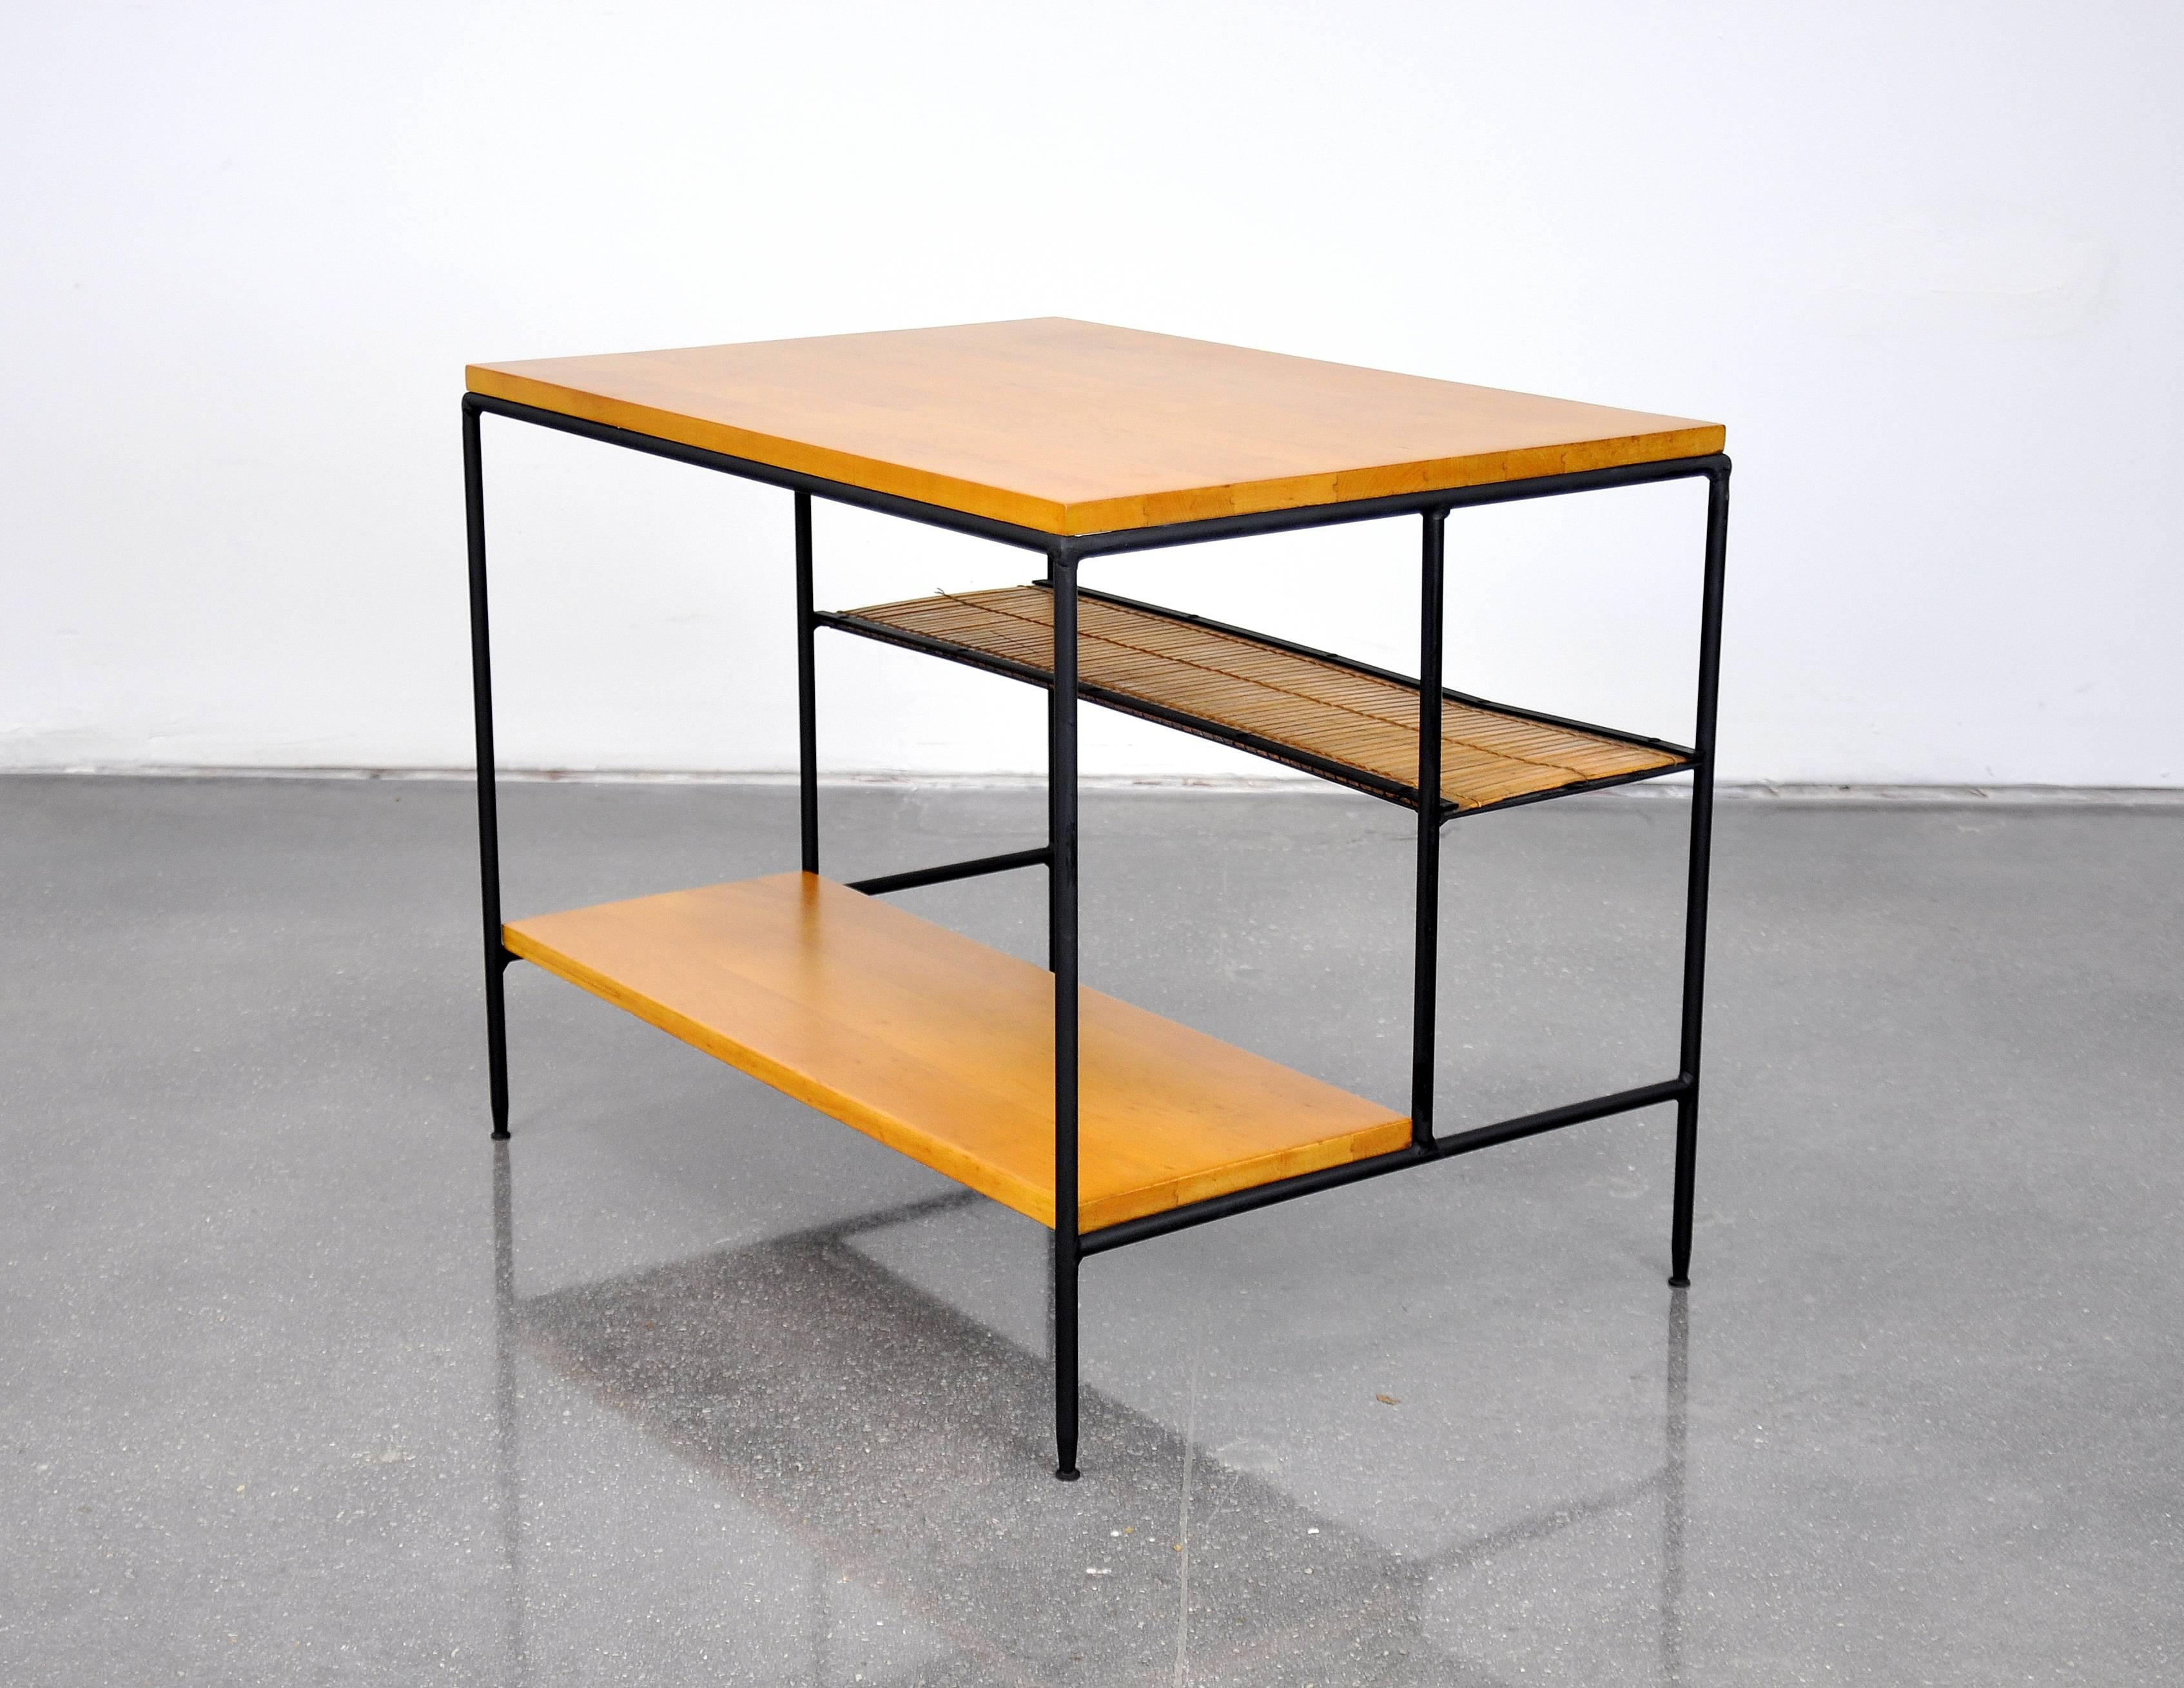 Vintage model 1578 Mid-Century Modern three-tiered end or occasional table designed by McCobb in the 1950s. The graceful black iron base is complemented by a two-tiered lower section with one solid and one bamboo slatted shelf. The simplicity of the